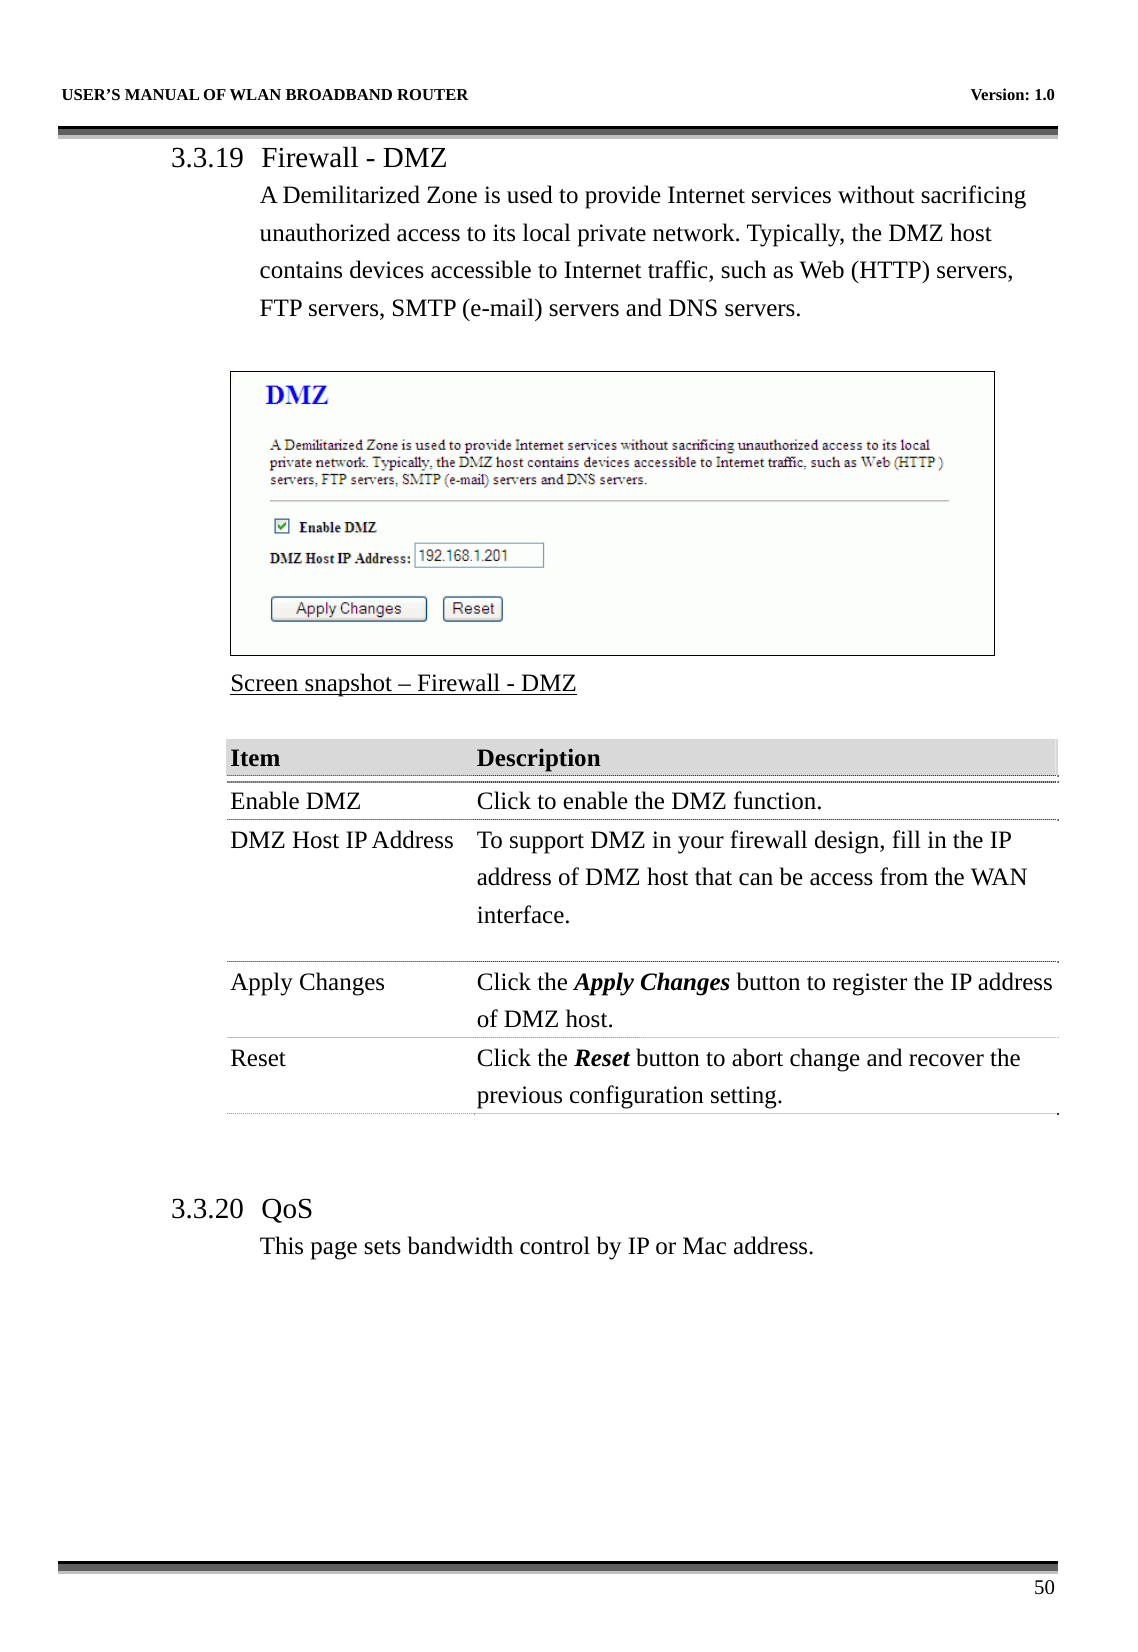   USER’S MANUAL OF WLAN BROADBAND ROUTER    Version: 1.0      50 3.3.19 Firewall - DMZ A Demilitarized Zone is used to provide Internet services without sacrificing unauthorized access to its local private network. Typically, the DMZ host contains devices accessible to Internet traffic, such as Web (HTTP) servers, FTP servers, SMTP (e-mail) servers and DNS servers.   Screen snapshot – Firewall - DMZ  Item  Description   Enable DMZ  Click to enable the DMZ function. DMZ Host IP Address  To support DMZ in your firewall design, fill in the IP address of DMZ host that can be access from the WAN interface. Apply Changes  Click the Apply Changes button to register the IP address of DMZ host. Reset Click the Reset button to abort change and recover the previous configuration setting.   3.3.20 QoS This page sets bandwidth control by IP or Mac address.  